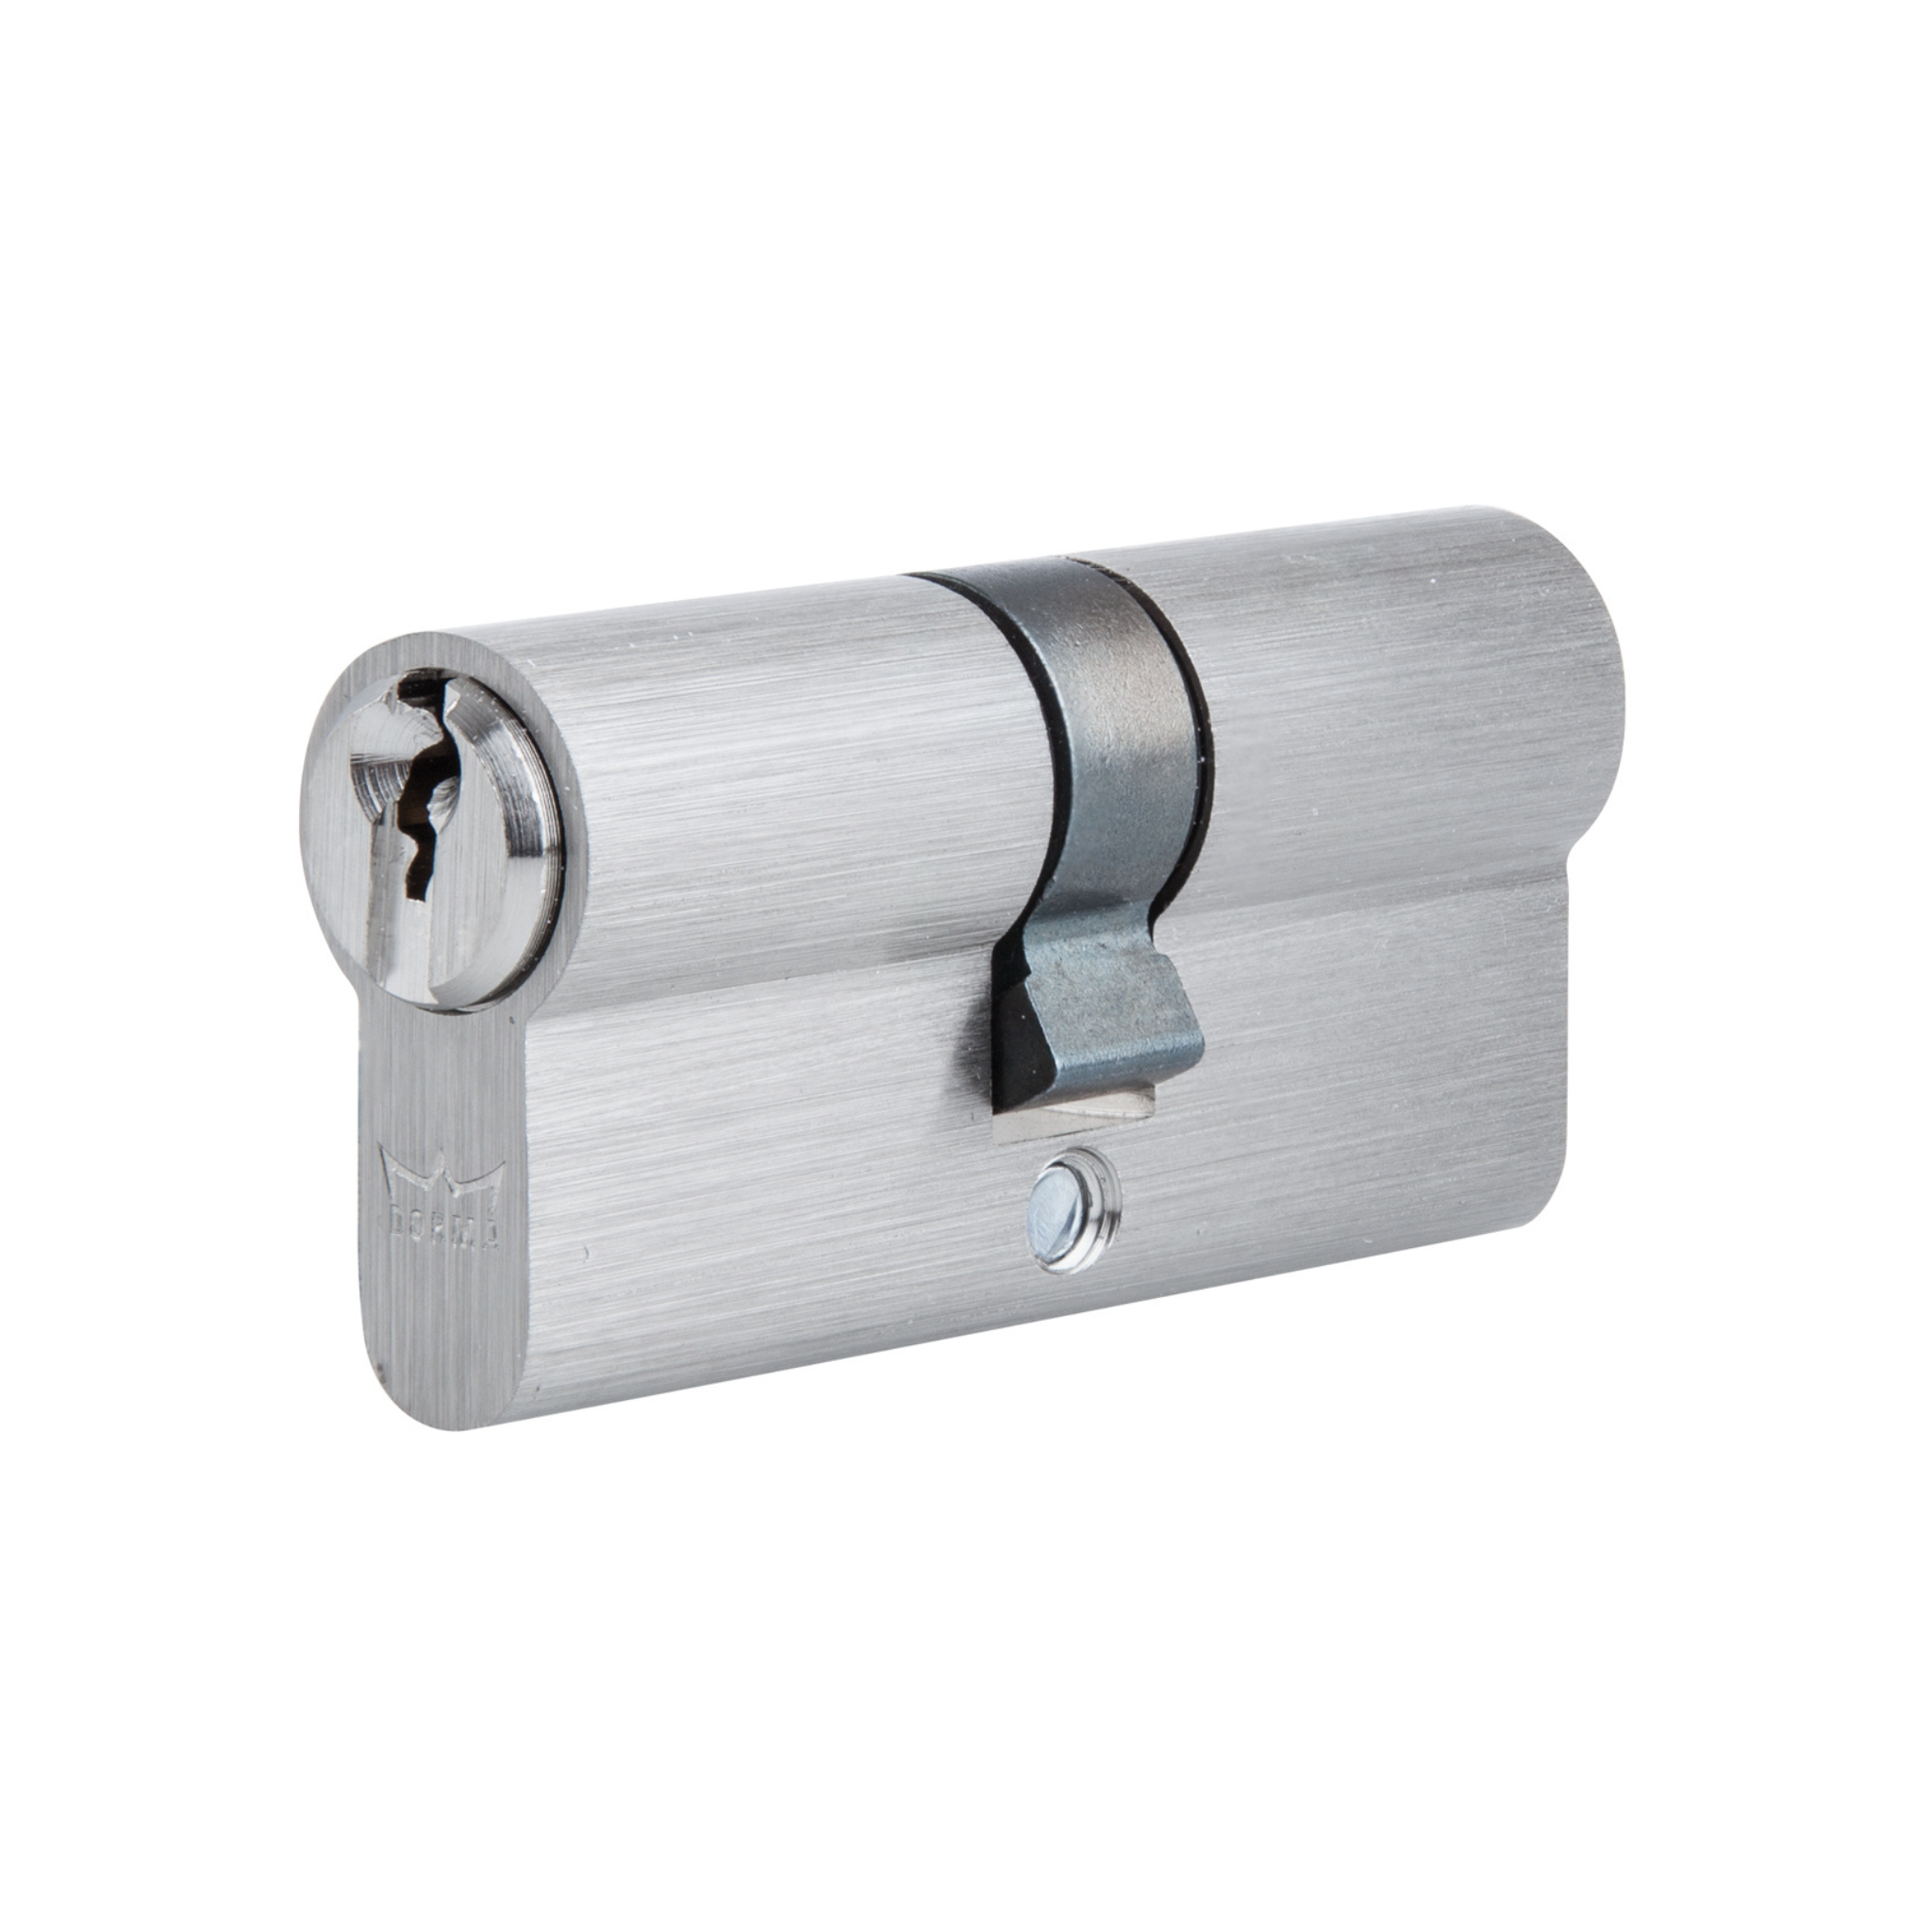 DDC057001 KD, 70mm (l), Double, Cylinder, Key to Key, Keyed Different, 5 Pin, Satin Nickel, DORMAKABA